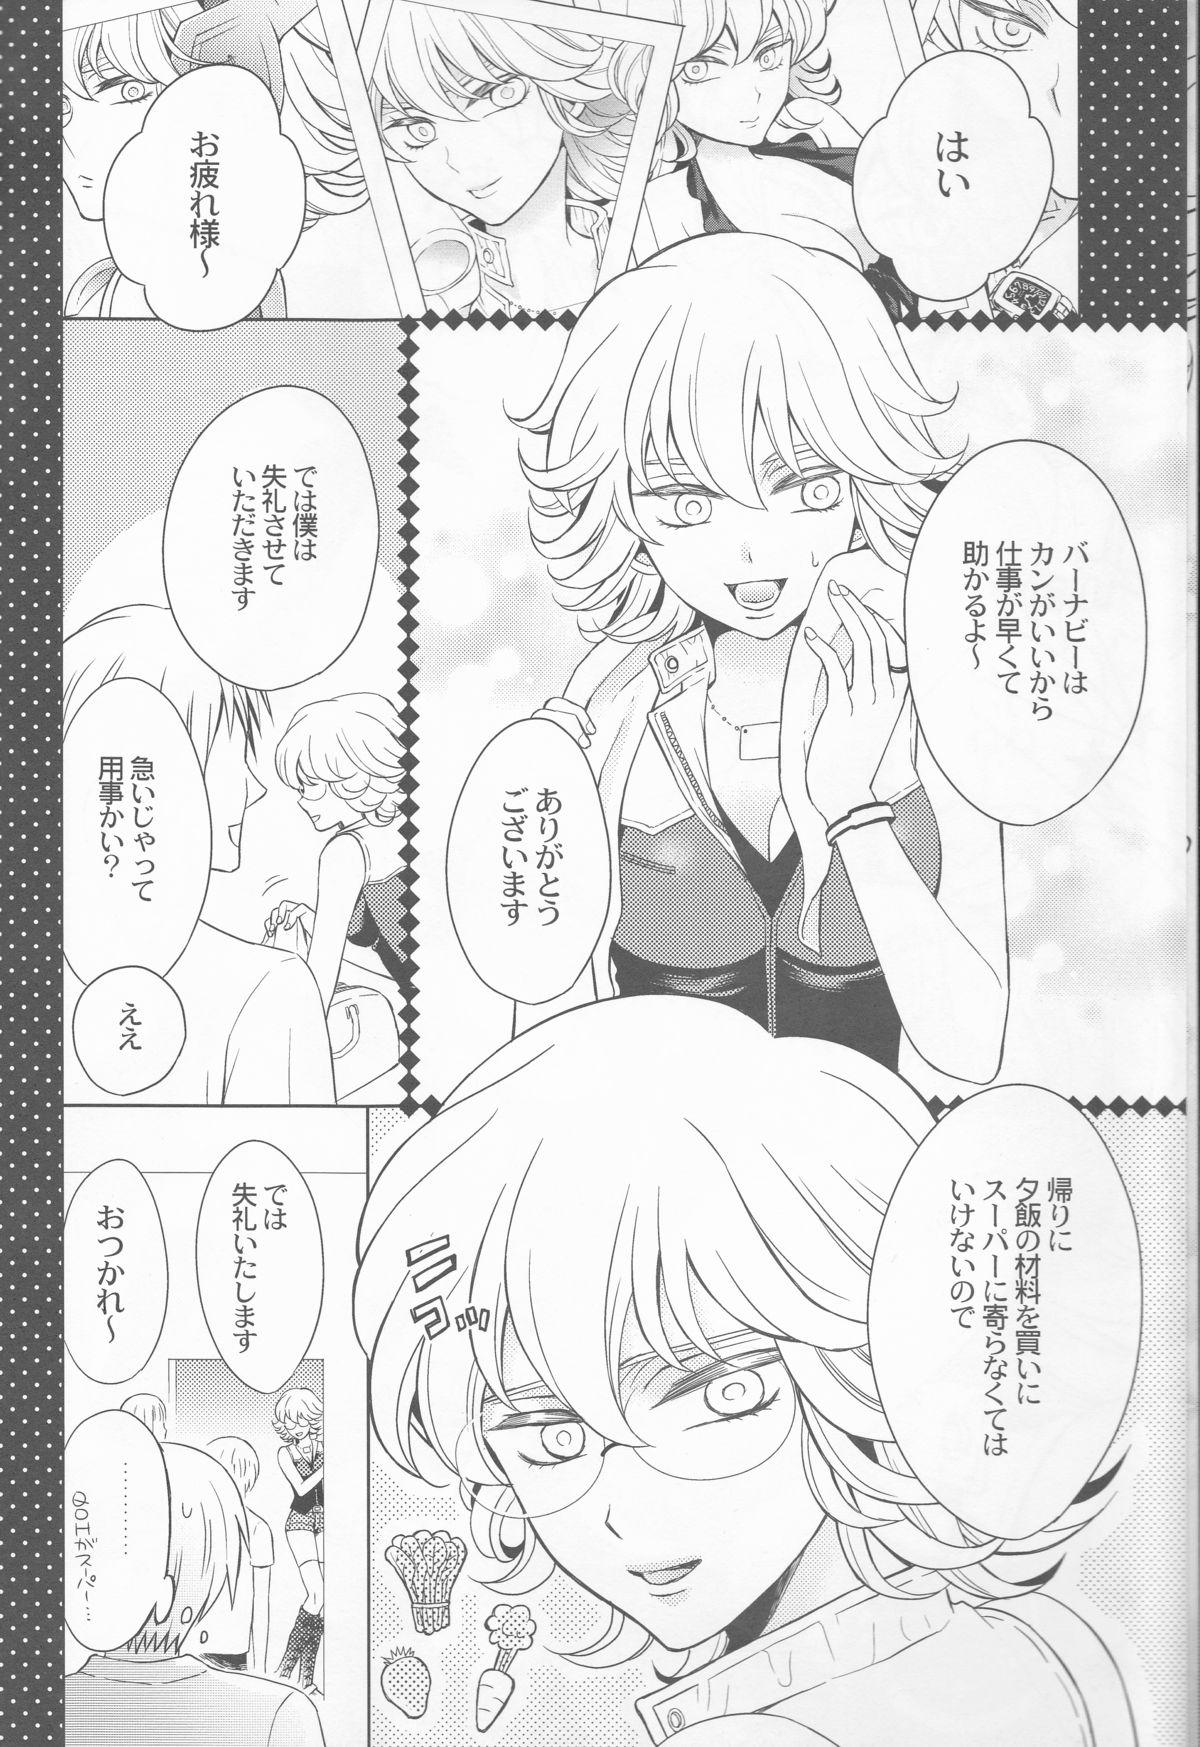 Transexual Candy Bunny - Tiger and bunny Bro - Page 5